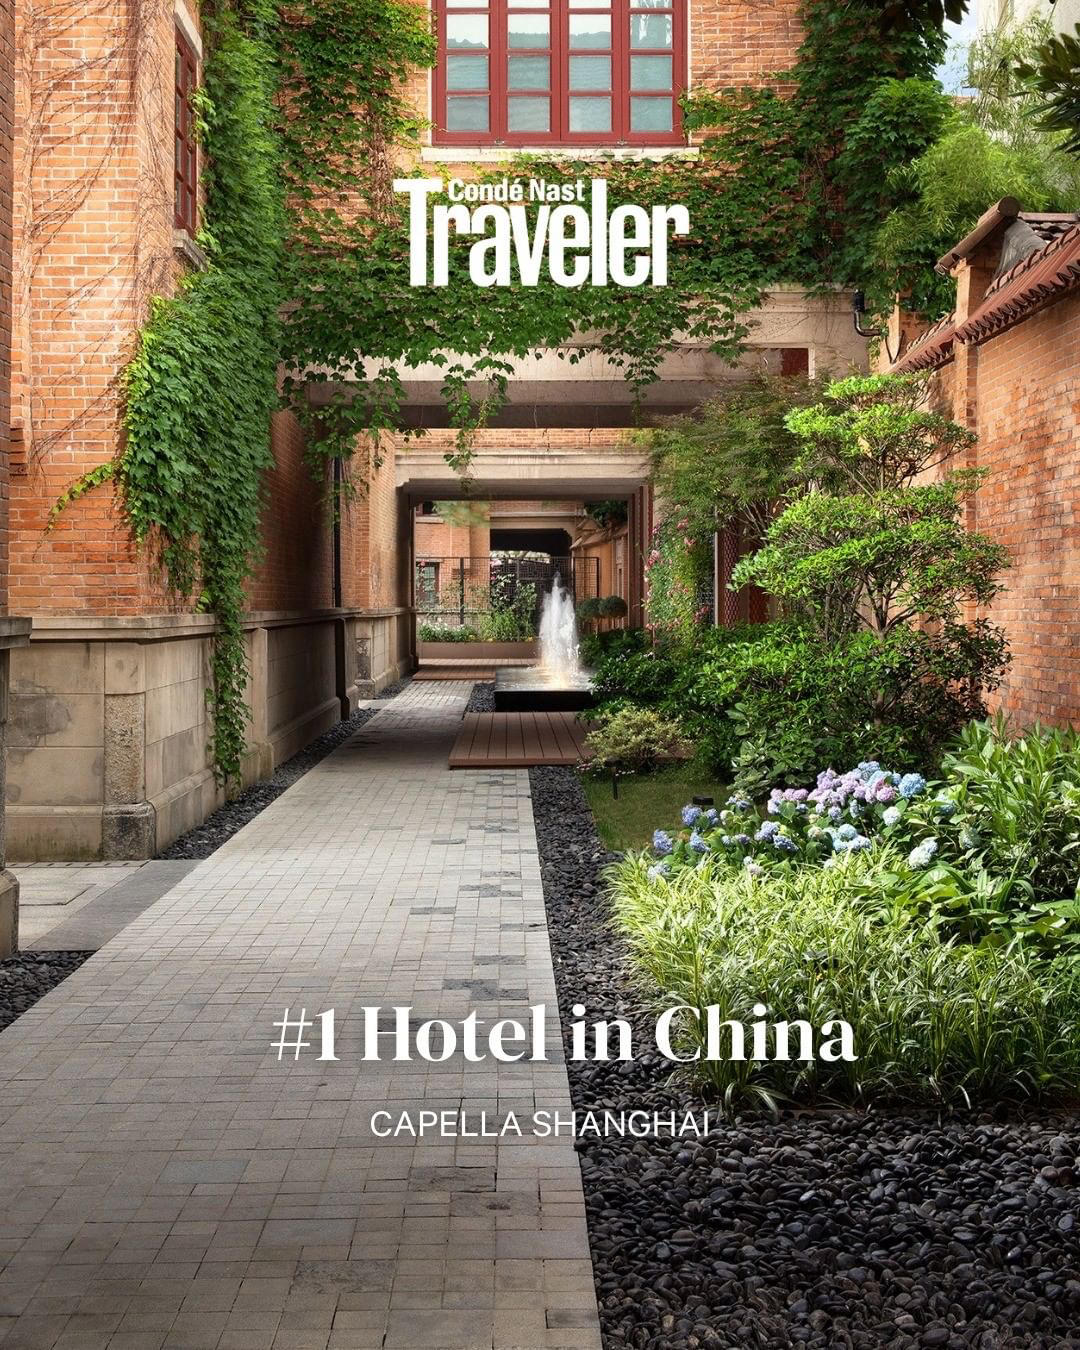 image  1 Capella Shanghai - We are thrilled to share that Capella Shanghai has been named the #1 Hotel in Chi